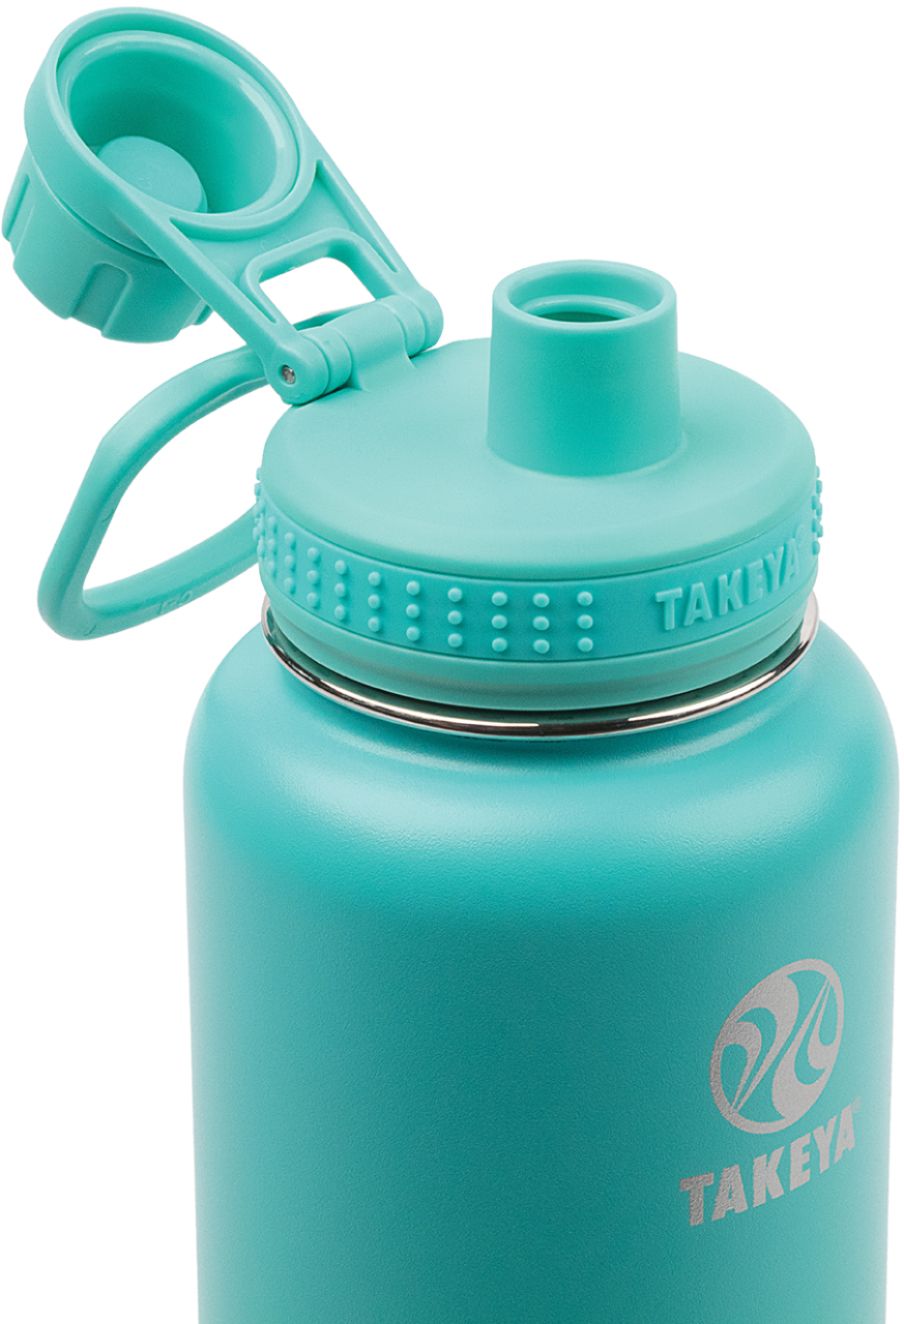 Left View: Takeya - Actives 32-Oz. Insulated Stainless Steel Water Bottle with Spout Lid - Teal